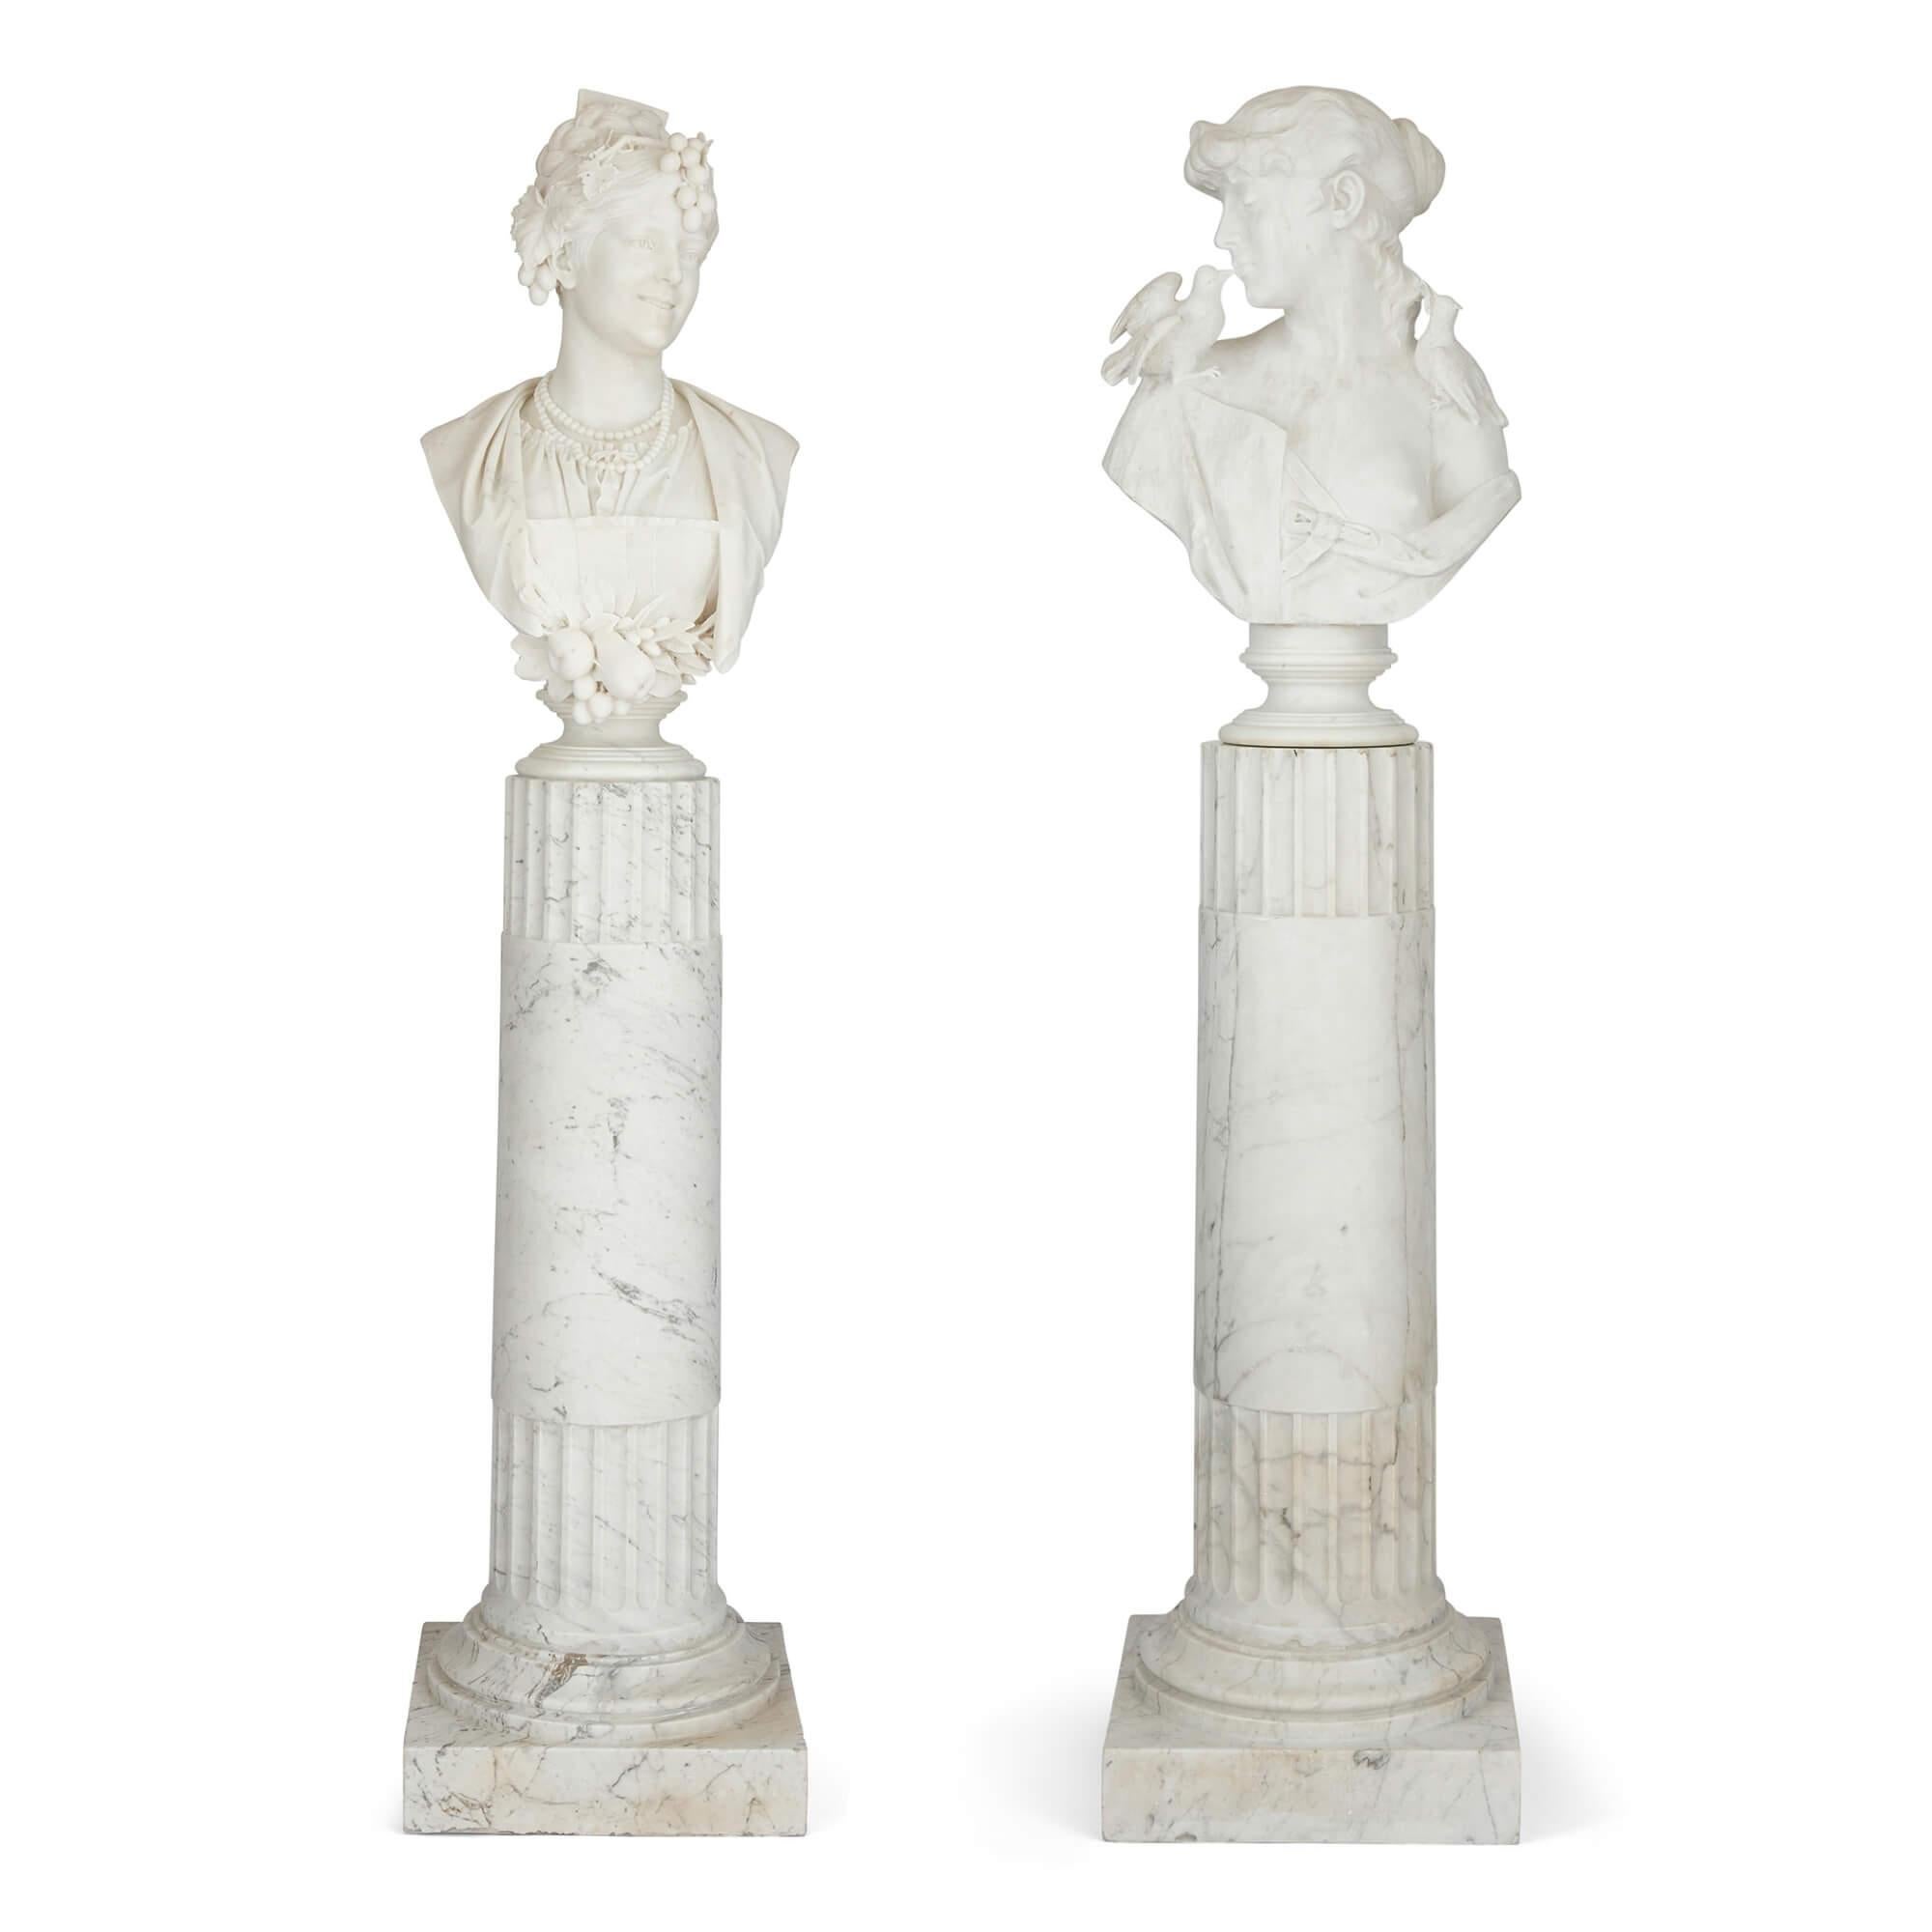 Pair of carved marble busts on stands by Italian sculptor Arnaldo Fazzi
Italian, 1889
Measures: Bust with fruit: Height 74cm, width 45cm, depth 35cm
Bust with birds: Height 69cm, width 45cm, depth 22cm
Pedestals: Height 117cm, width 45cm, depth